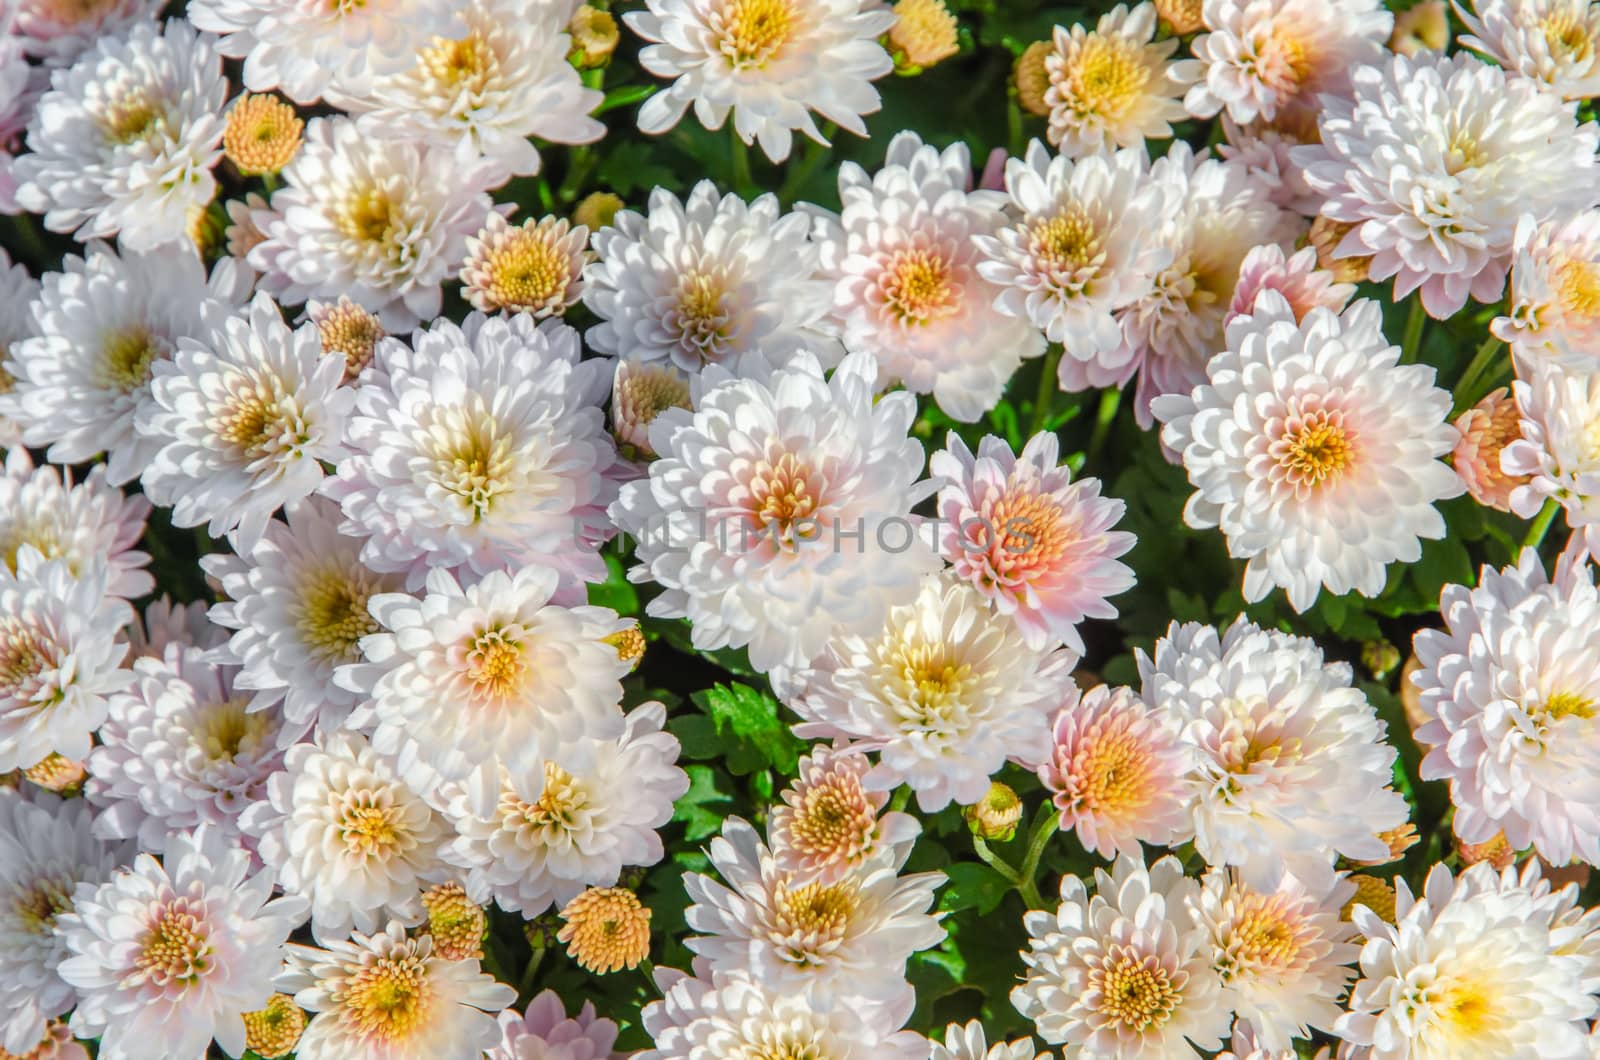 A display of very pale pink potted chrysanthemums in a garden centre.